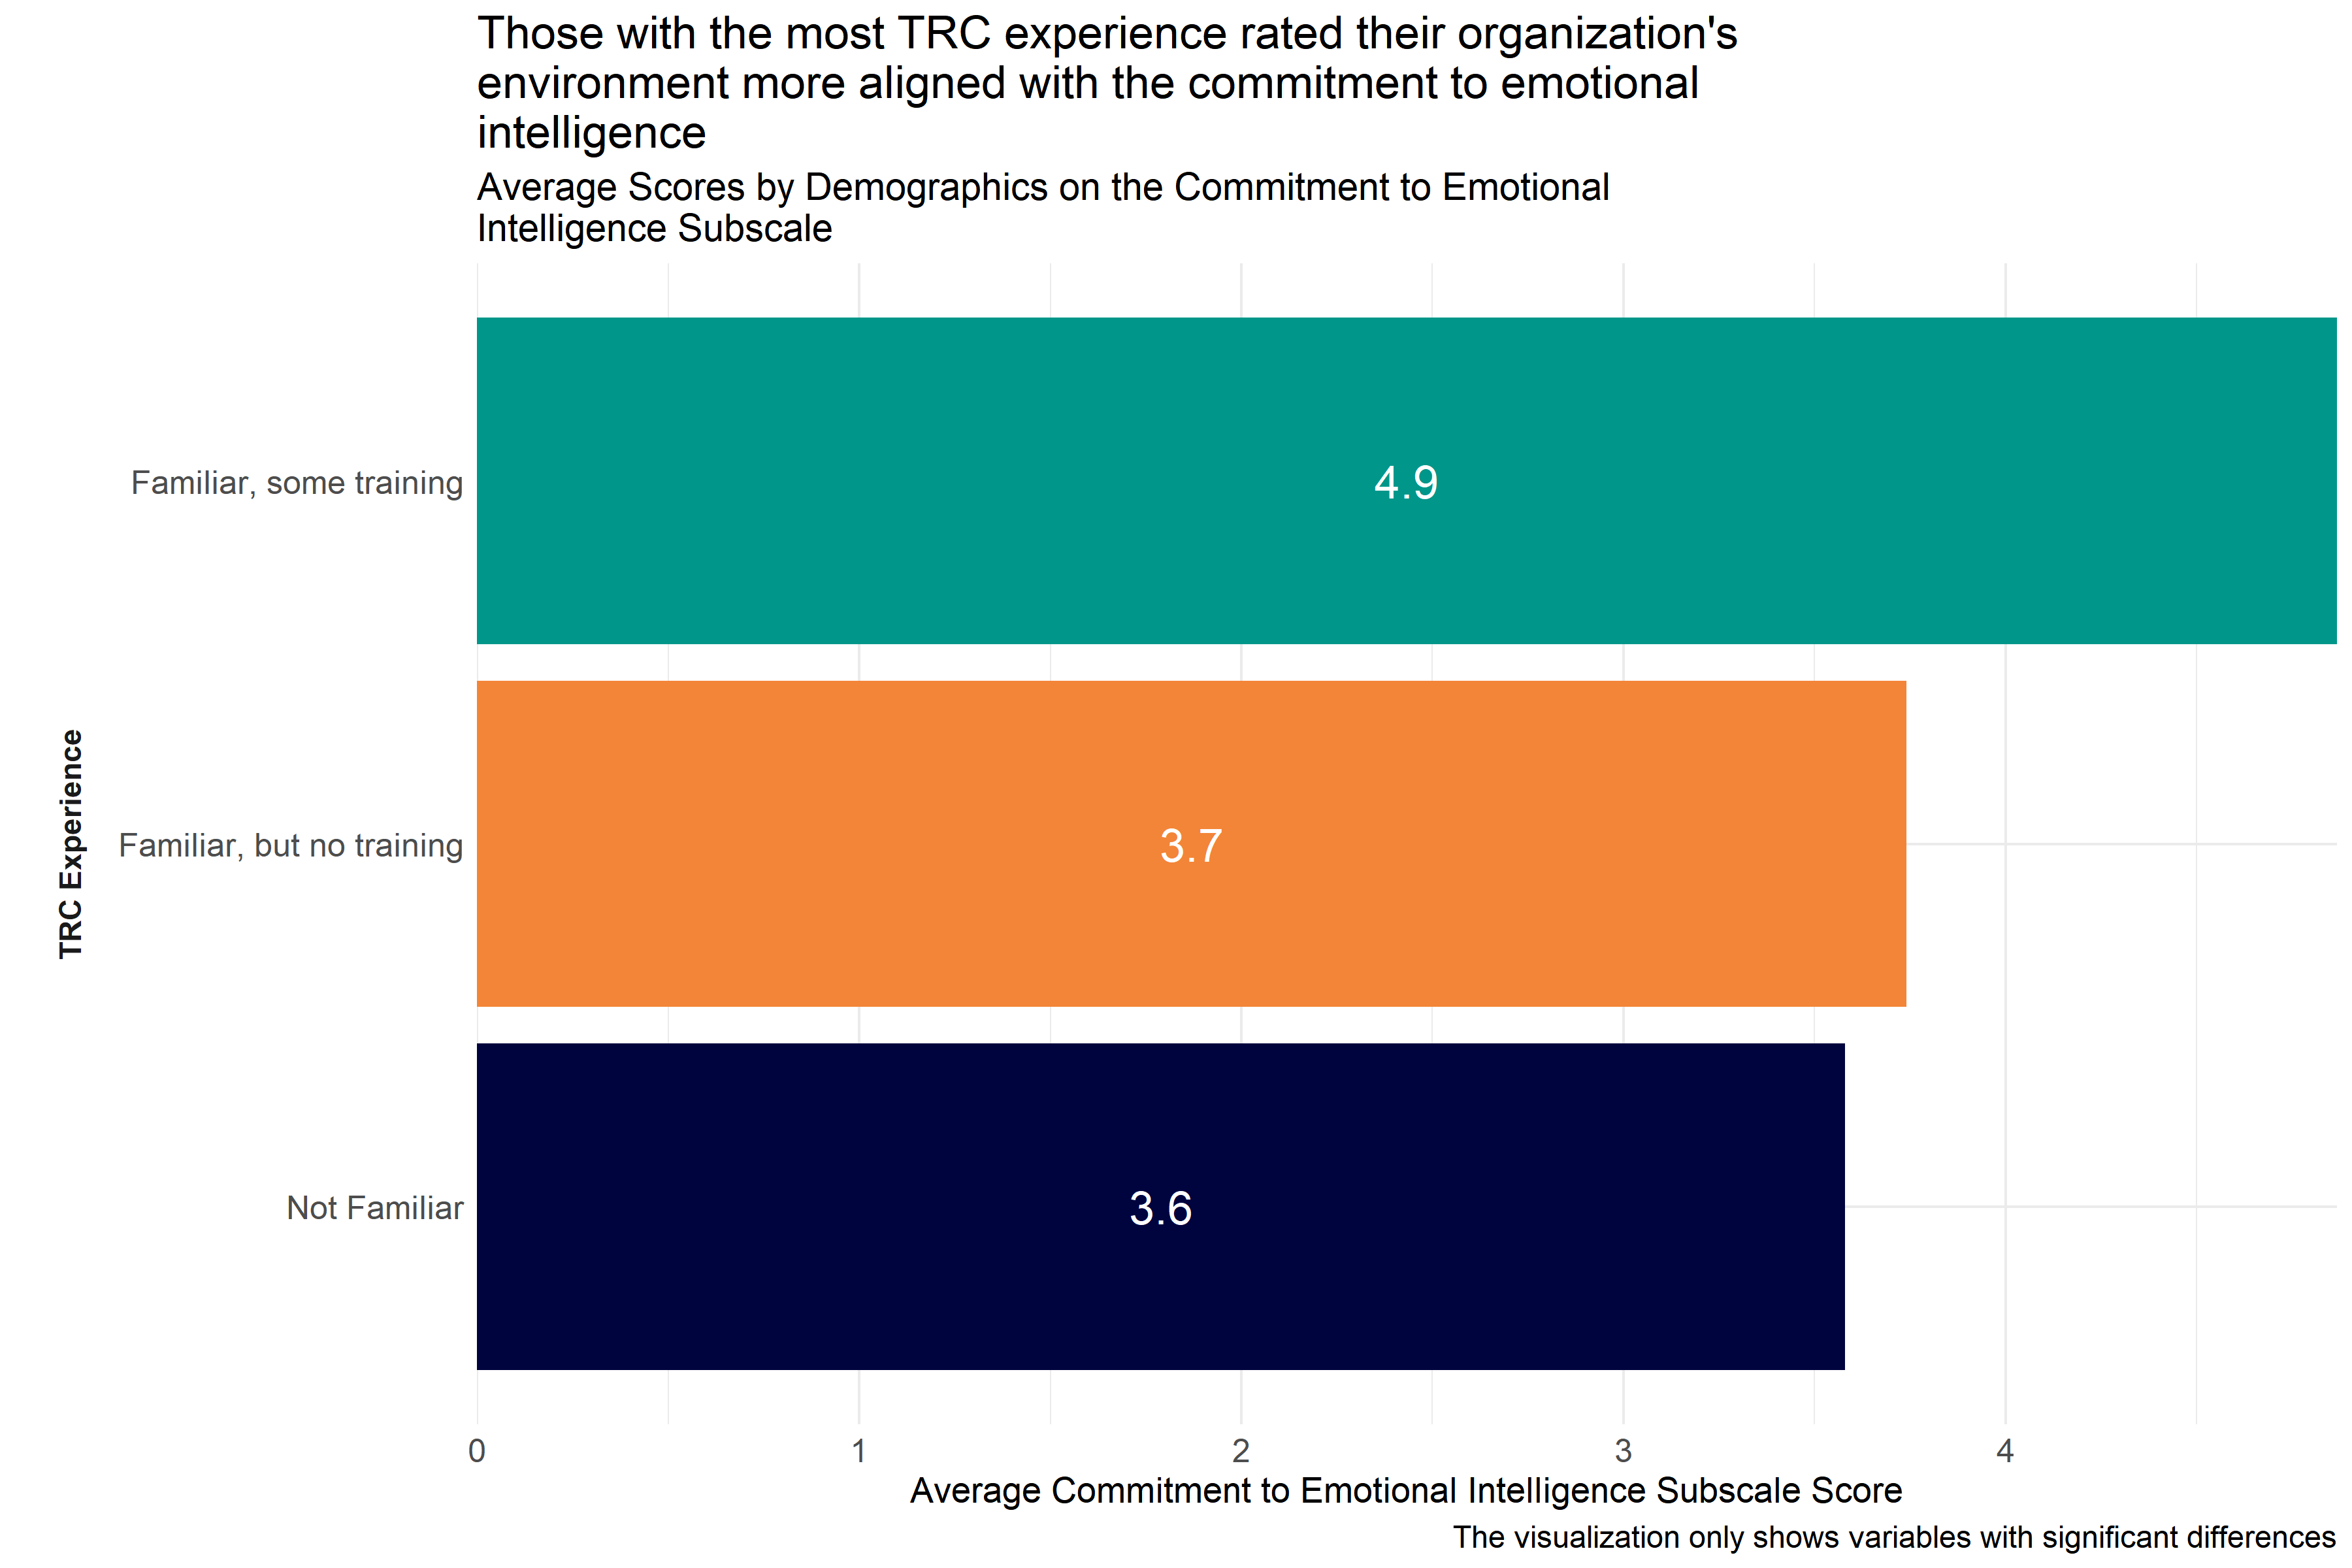 Average scores for Commitment to Emotional Intelligence
Subscale across demographic groups